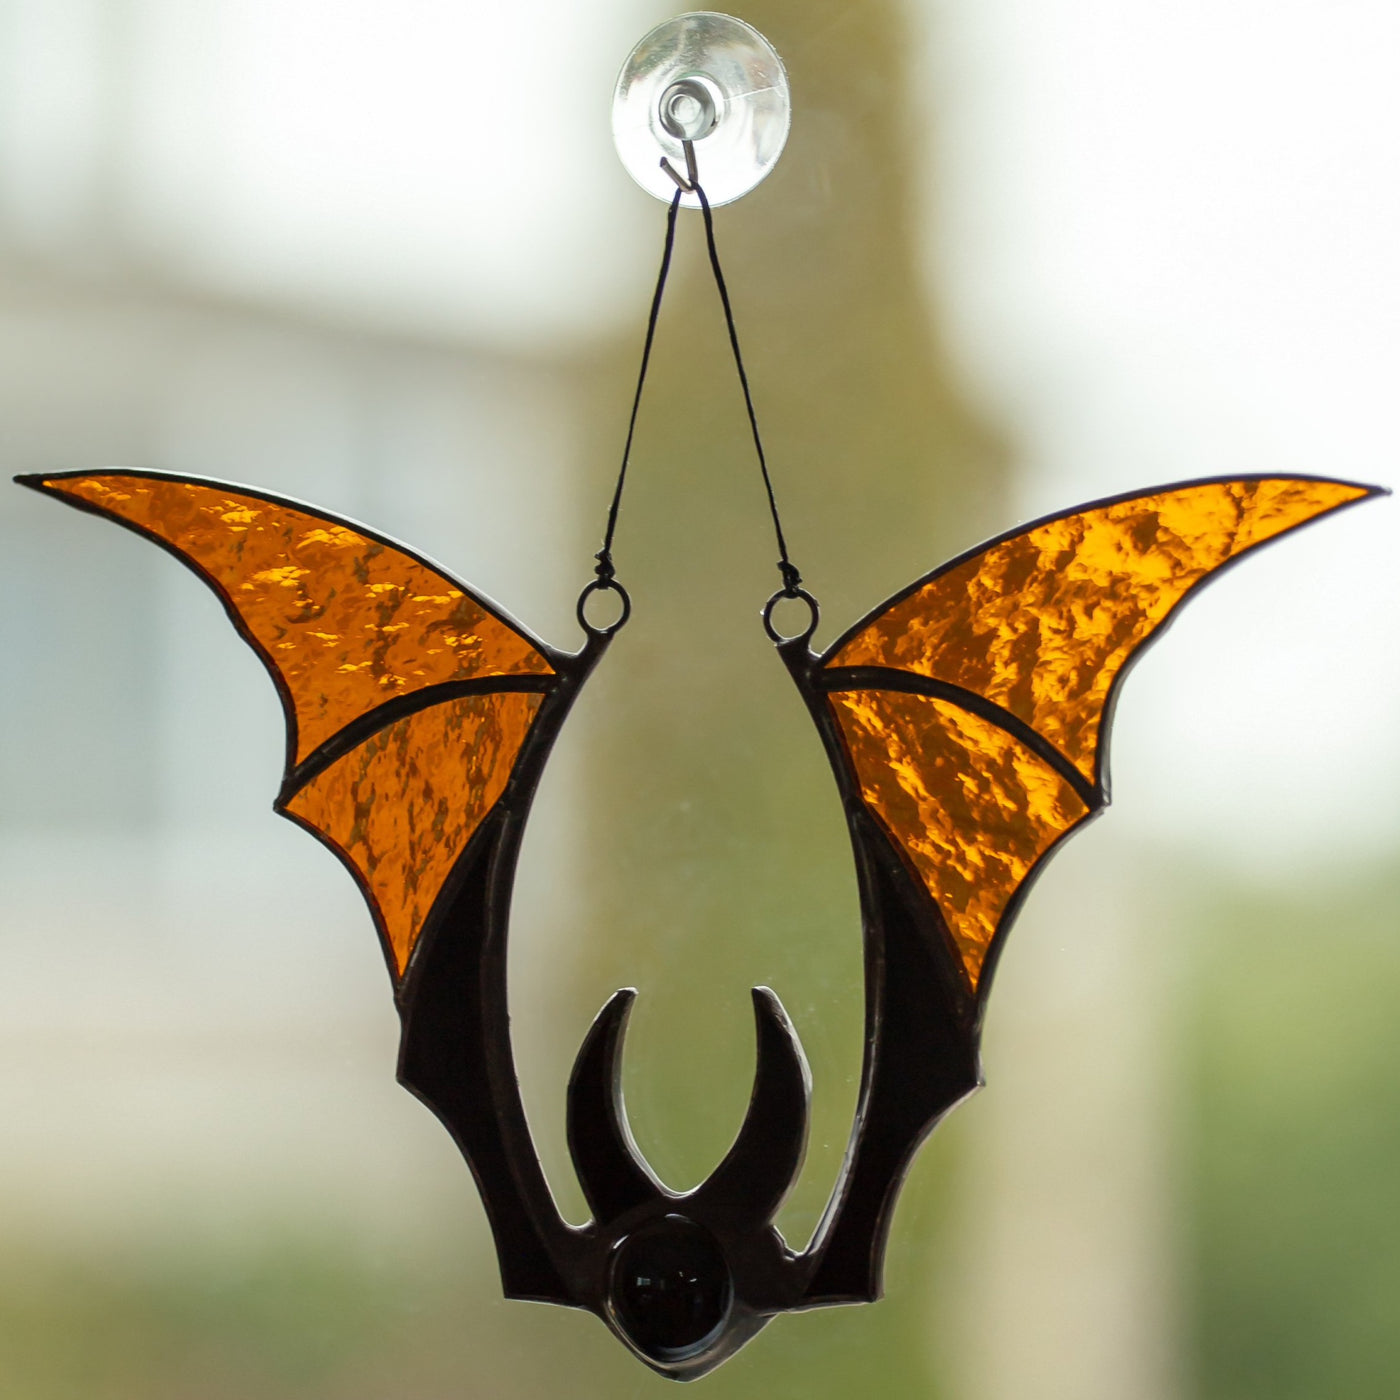 Brown-winged stained glass bat window hanging